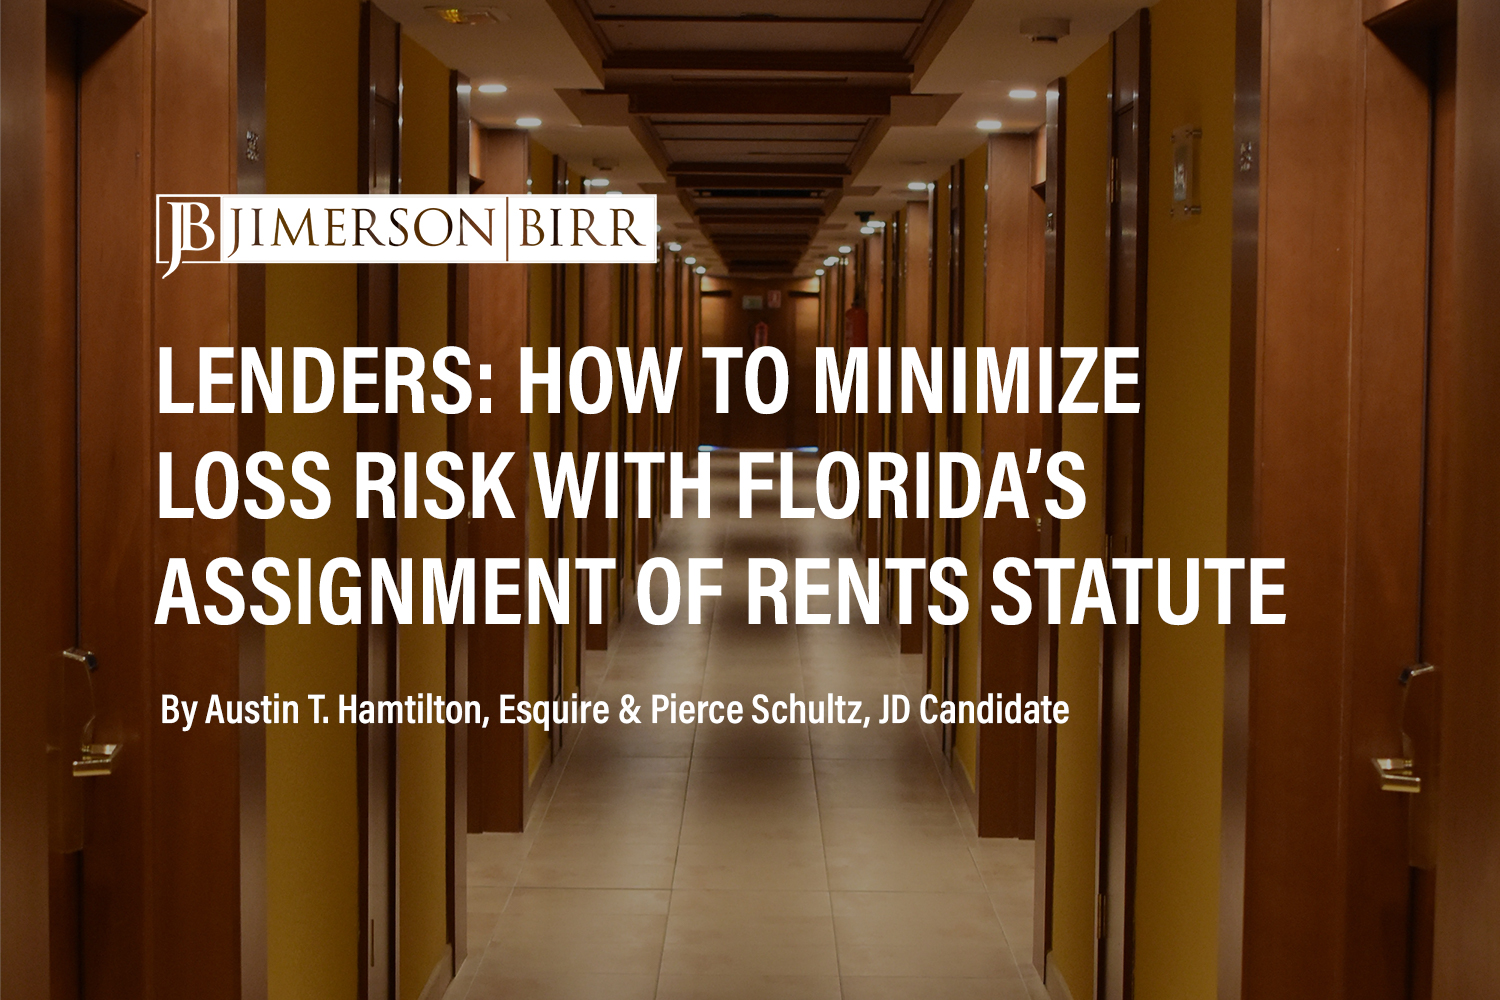 Mitigating Risks Associated with Hotel, Restaurant and Entertainment Industry Economic Challenges: Part 4 – Assignment of Rents Under Section 697.07, Florida Statutes